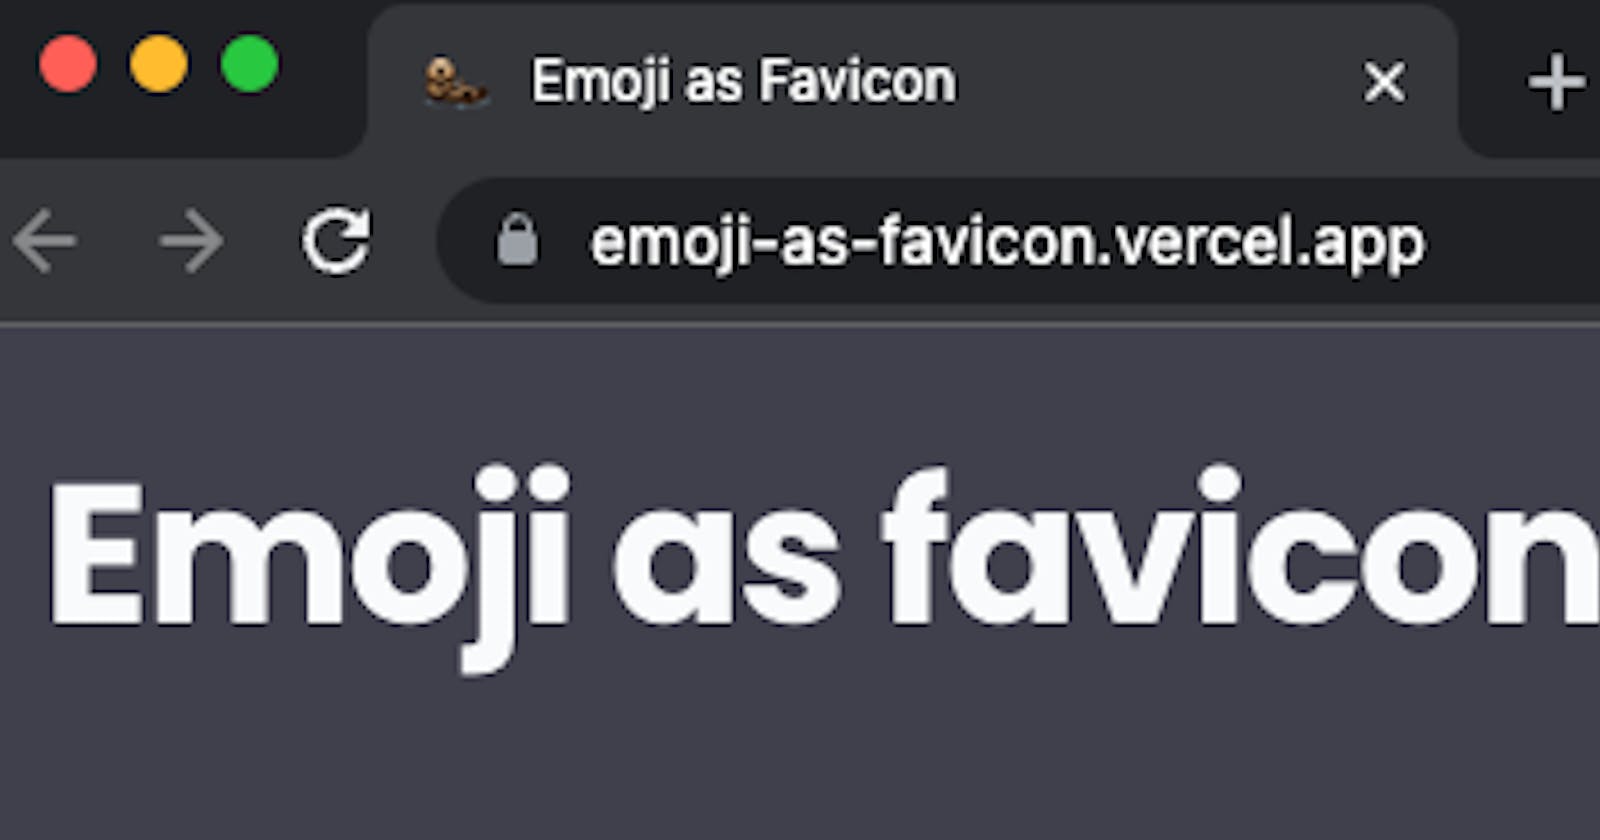 Using emoji as favicon dinamically with Next.js